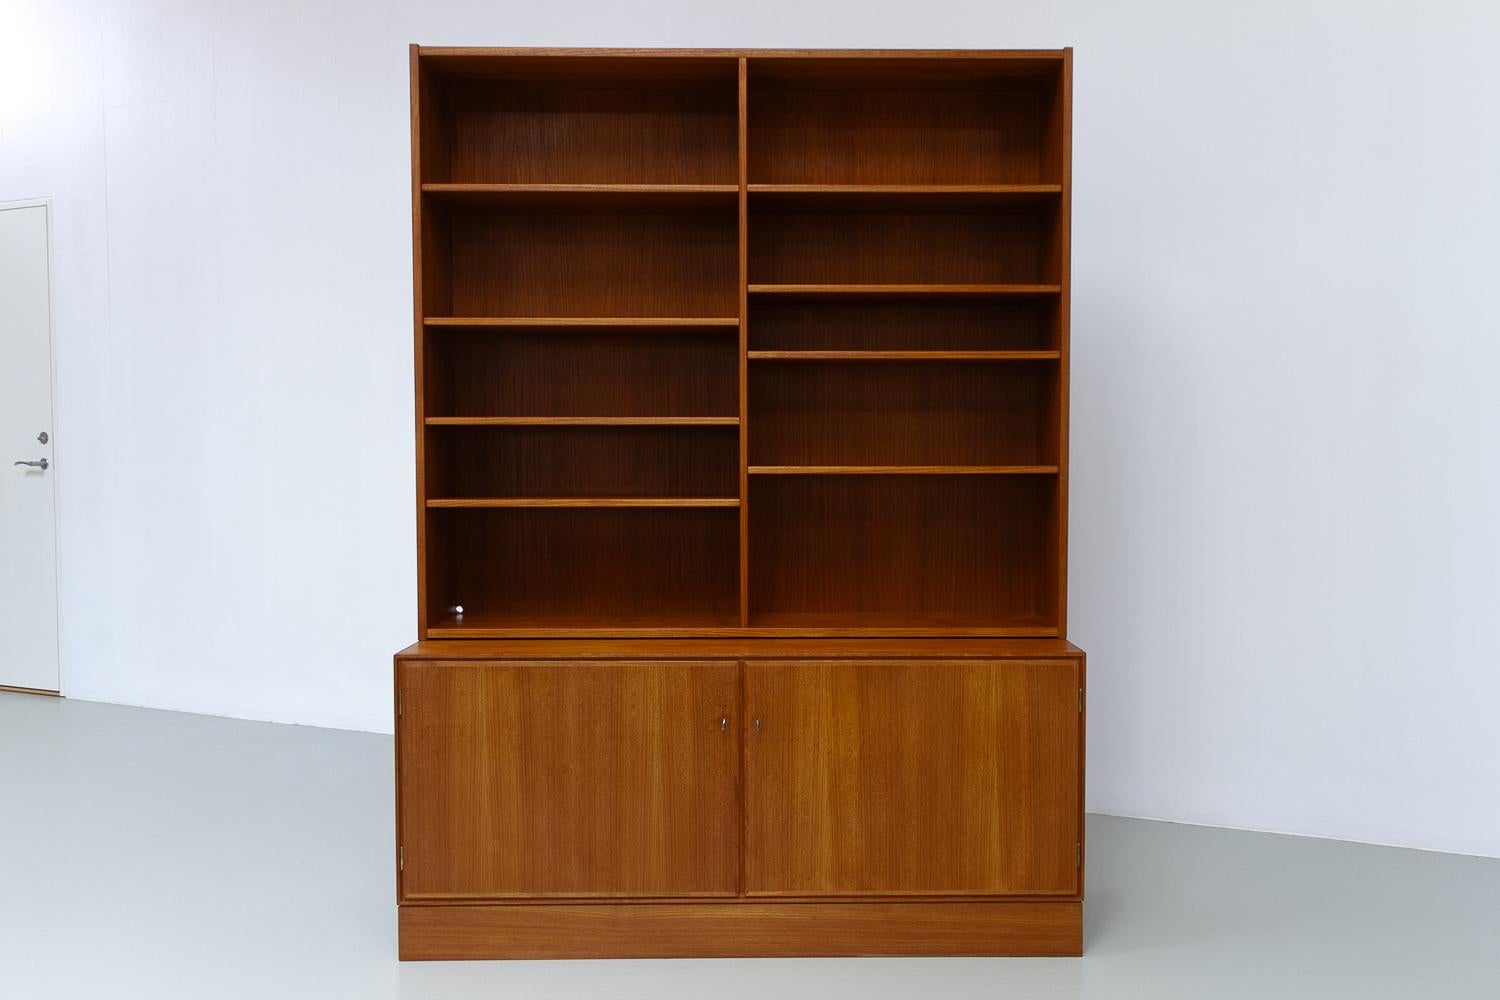 Danish Modern Teak Bookcase, 1960s.
Danish Mid-Century Modern bookcase and cabinet in teak. Manufactured in Denmark in the 1960s. In the style of Carlo Jensen/Hundevad/Børge Mogensen.

This bookcase consists of two parts. Upper part with eight